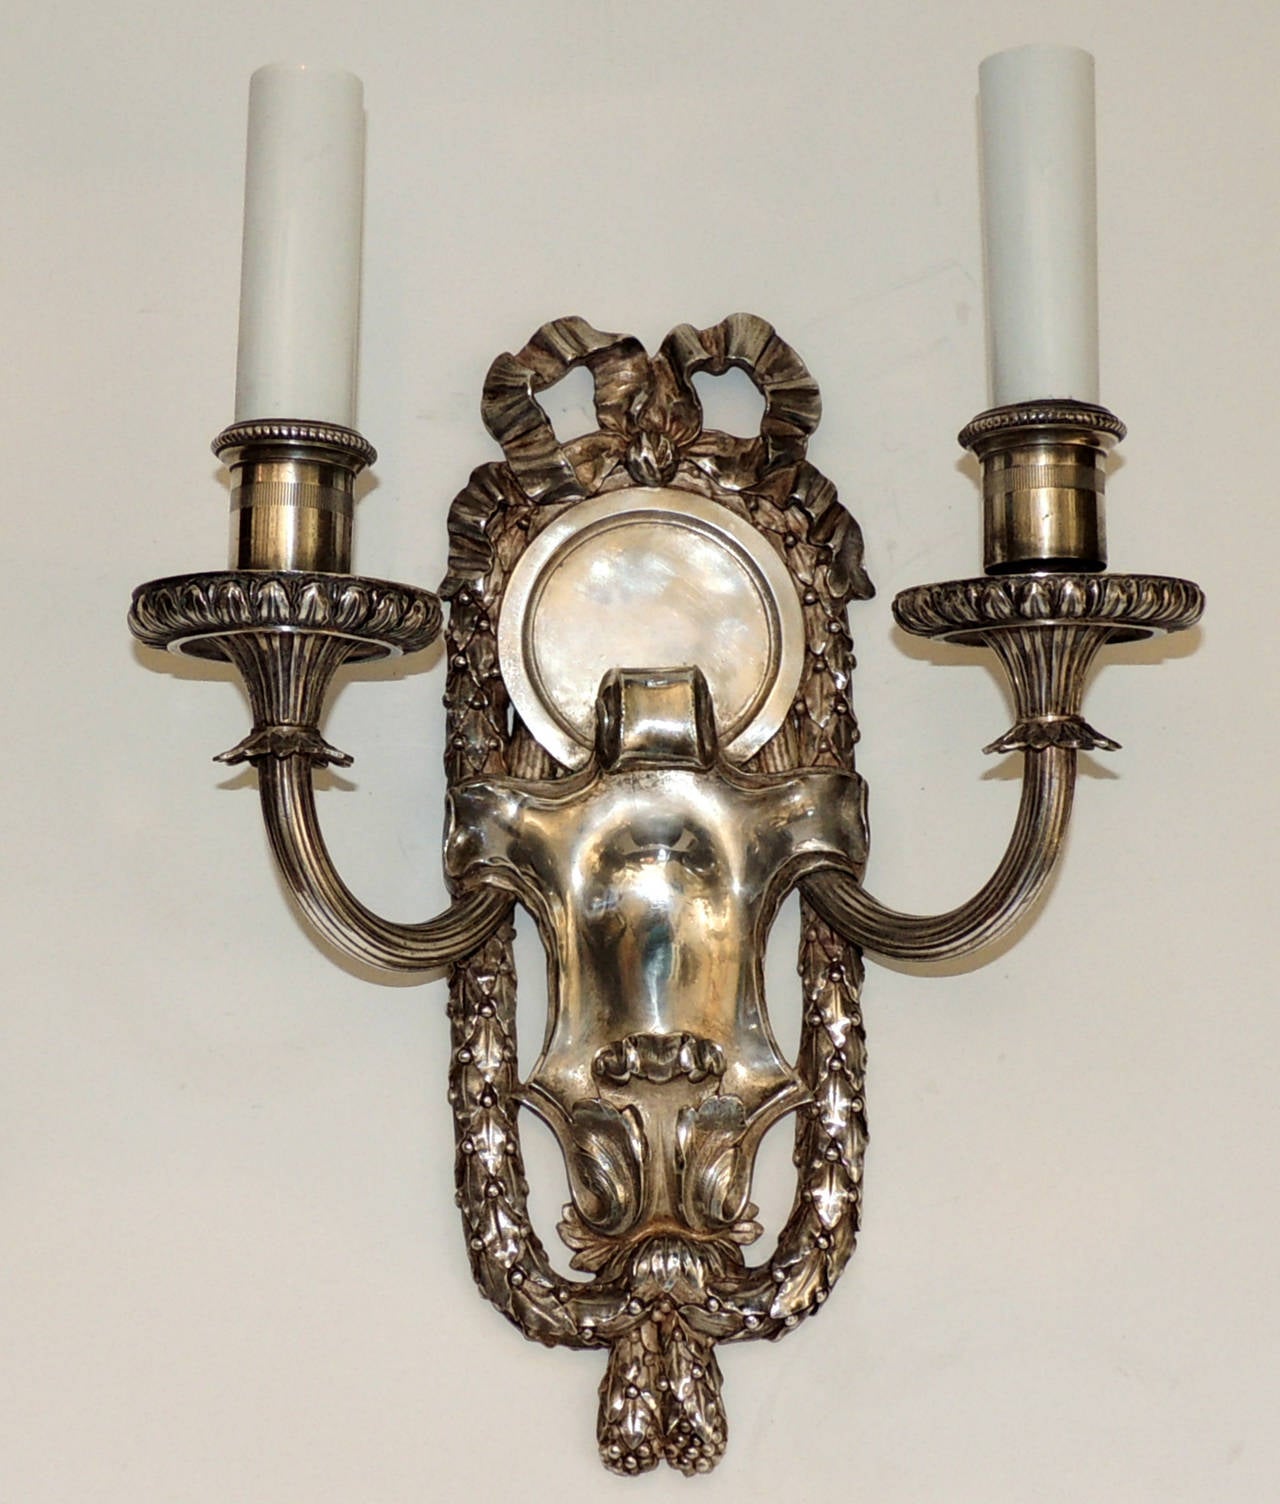 We Have Available Two pairs of marked Caldwell silvered bronze sconces with embellished bow top and framed with filigree draping. With a softly aged silvered bronze patina, the sconces are set off with a wonderful polished center, the two fluted